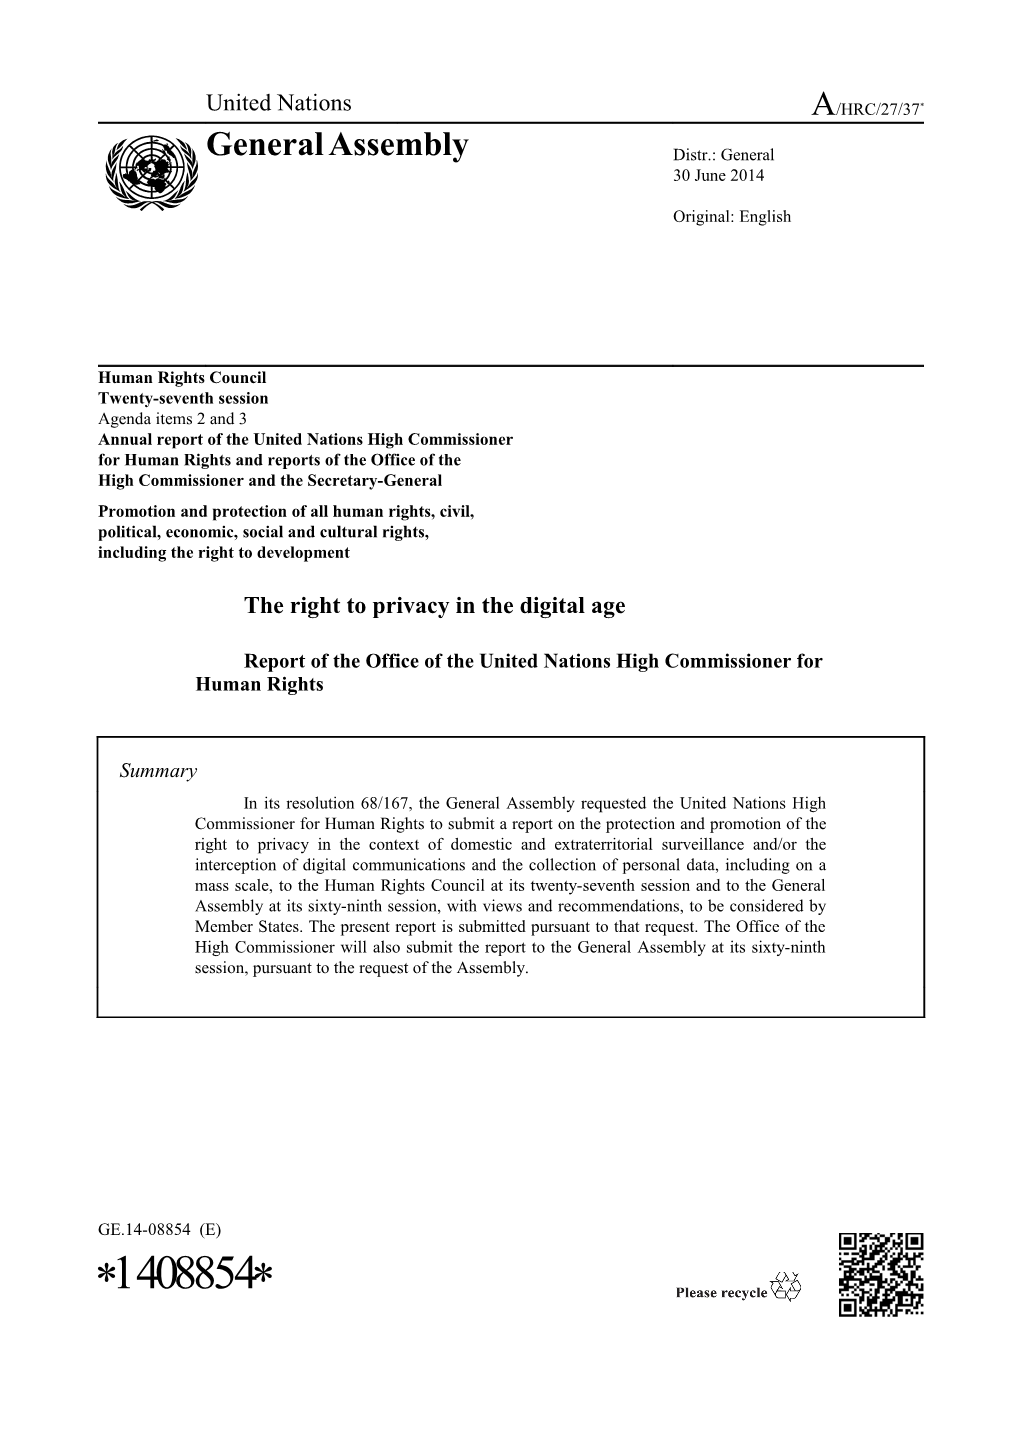 The Right to Privacy in the Digital Age - Report of the Office of the High Commissioner